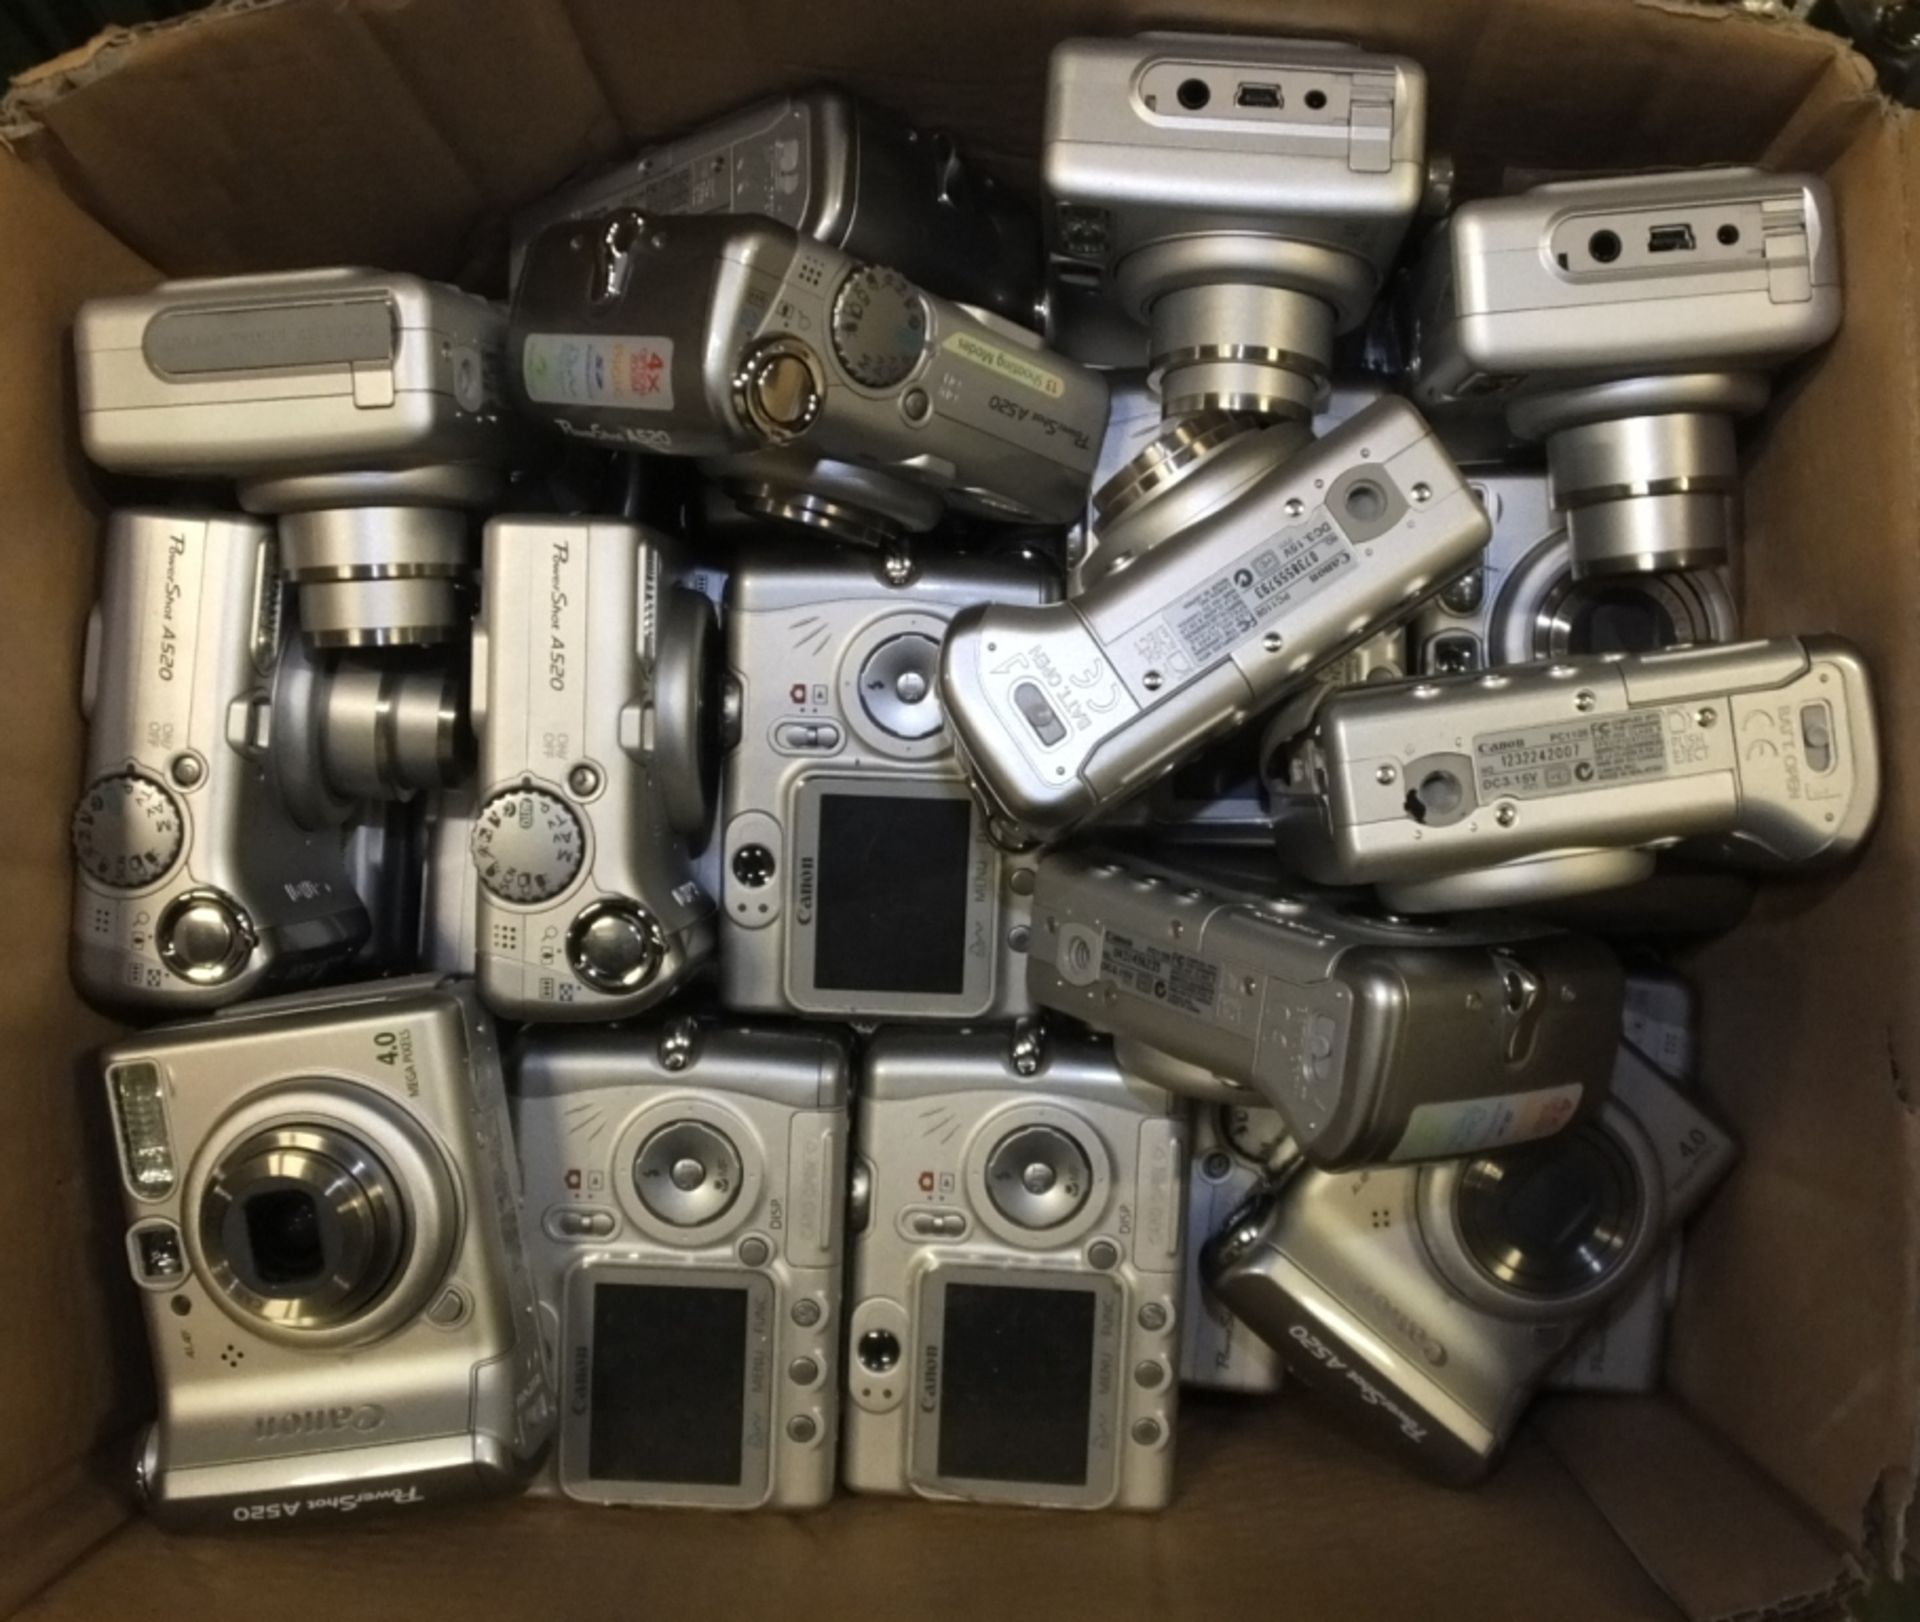 Canon Powershot A520 digital cameras - approx 50 - as spares or repairs - Image 2 of 2